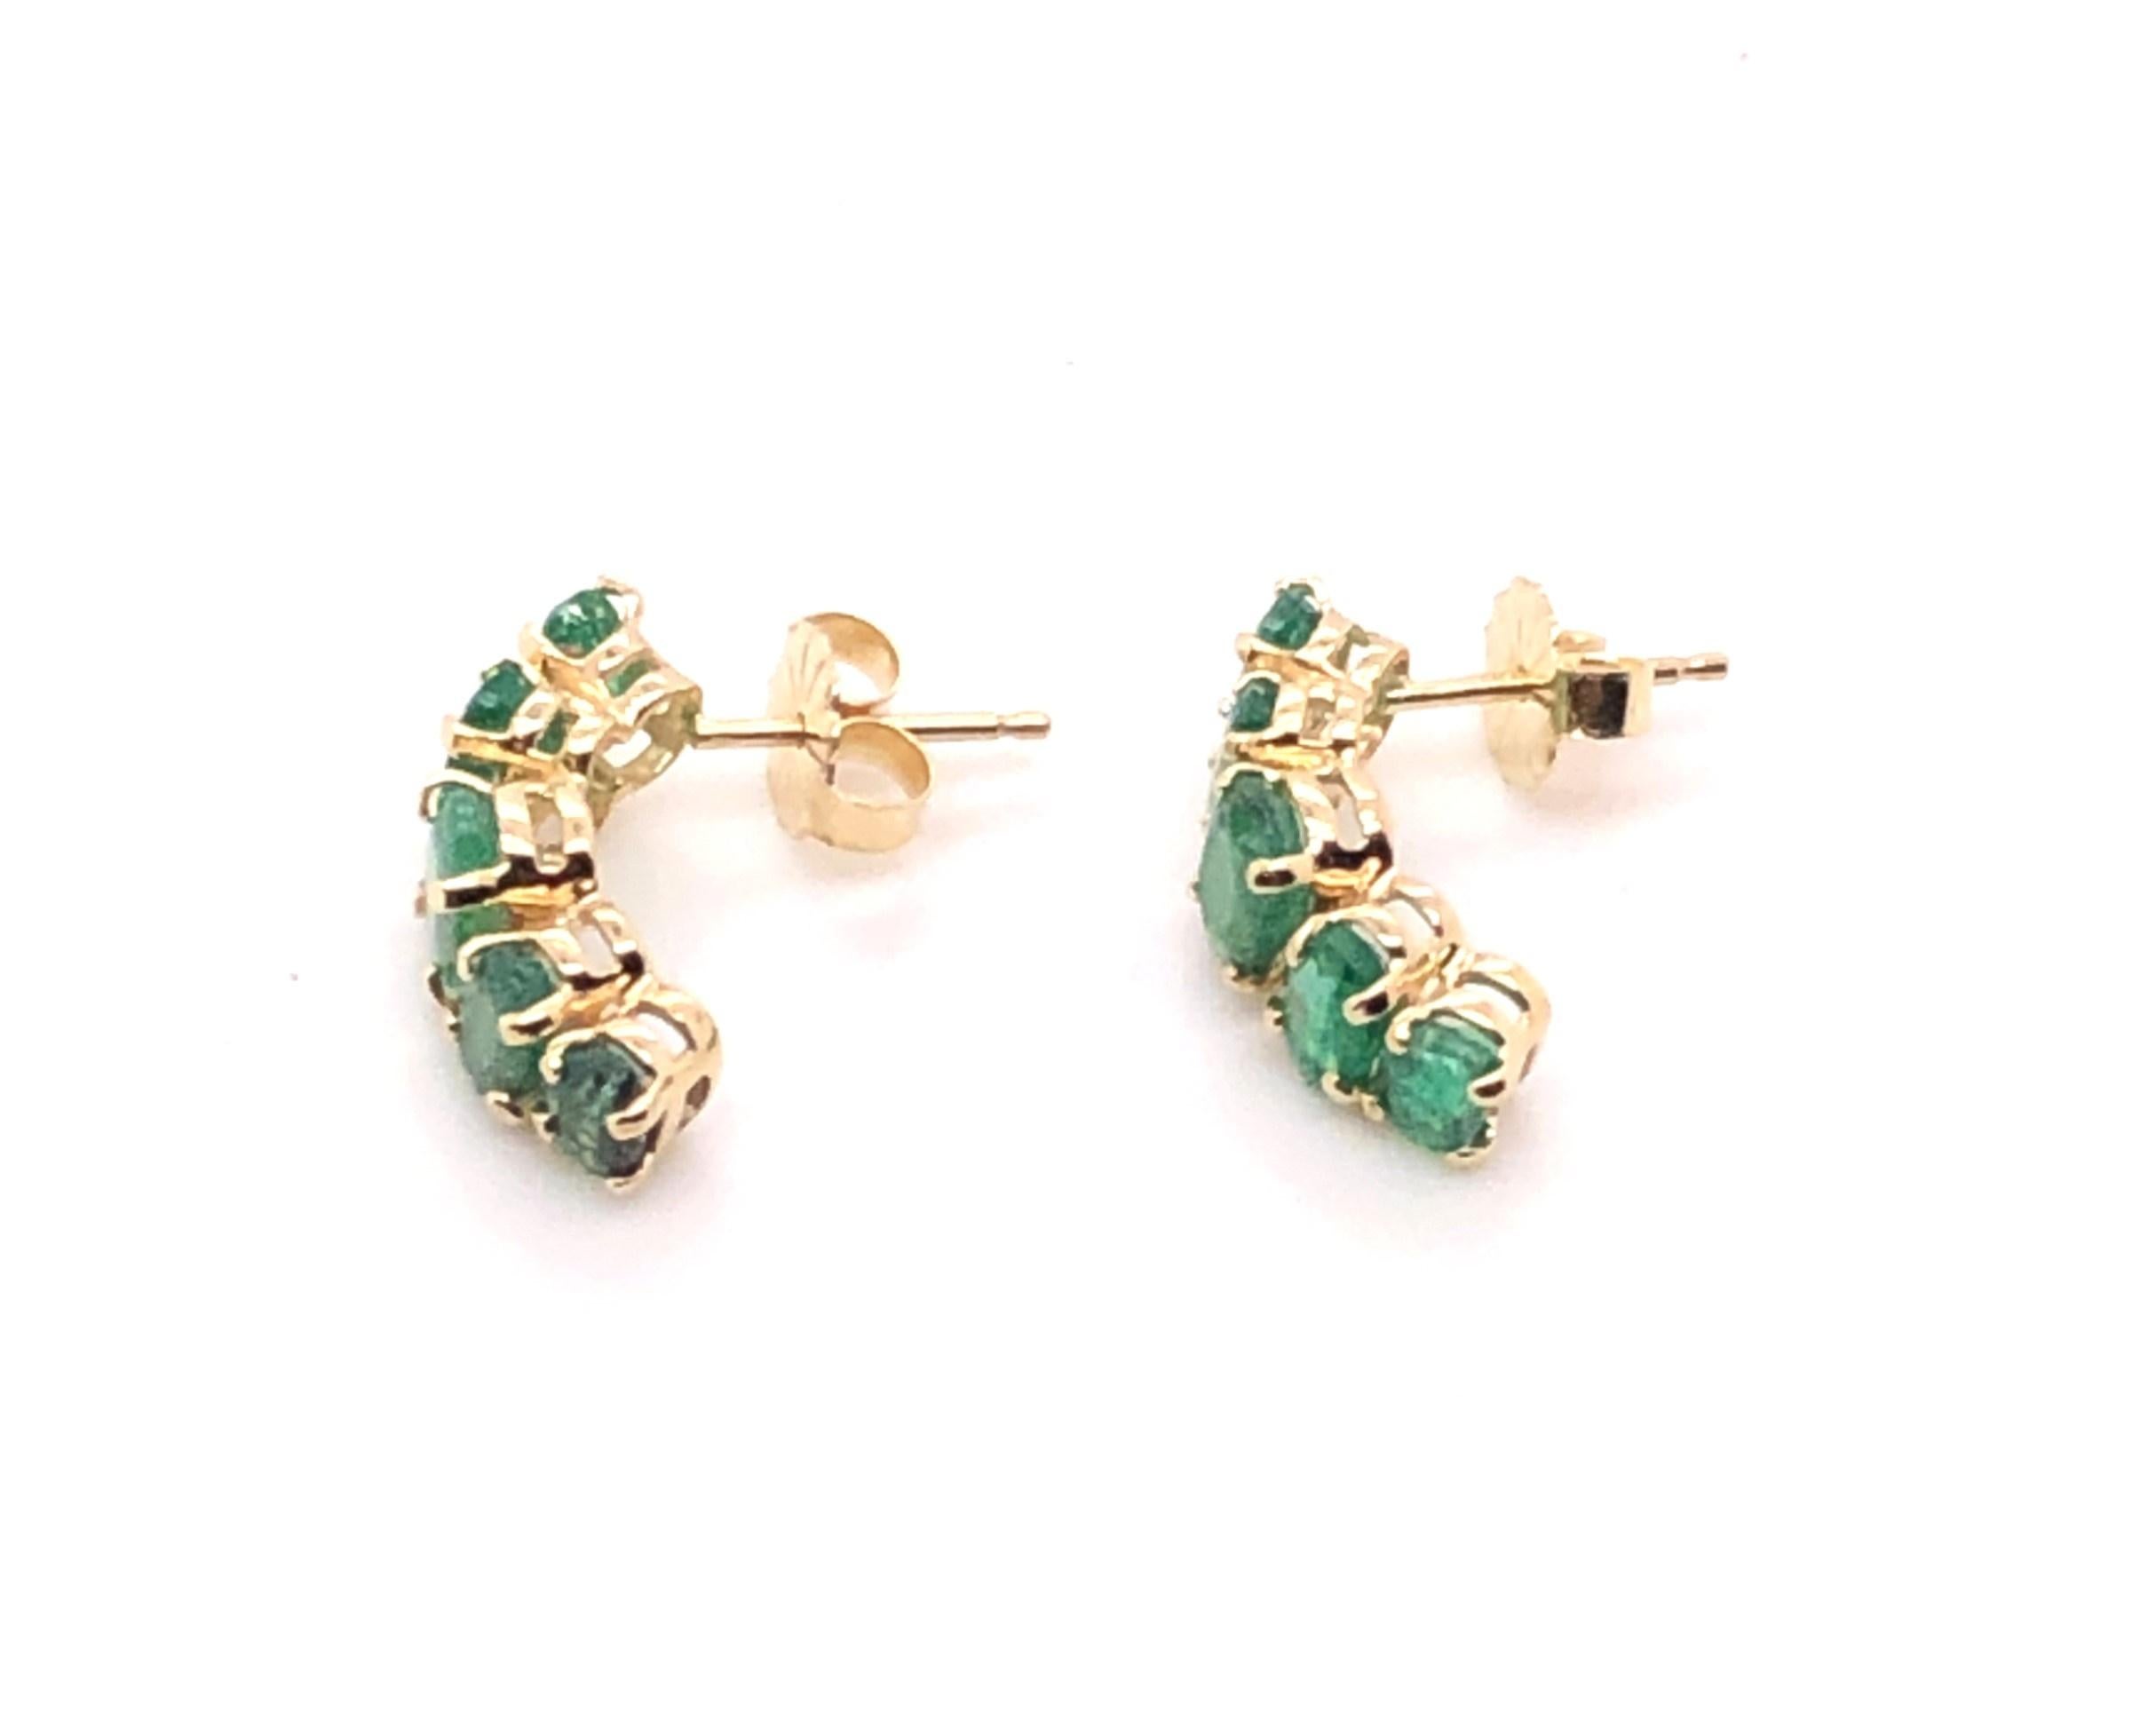 14kt yellow gold 5-stone approximately 2.10tcw  Emerald Post Back Earrings. These earrings are styled in a 